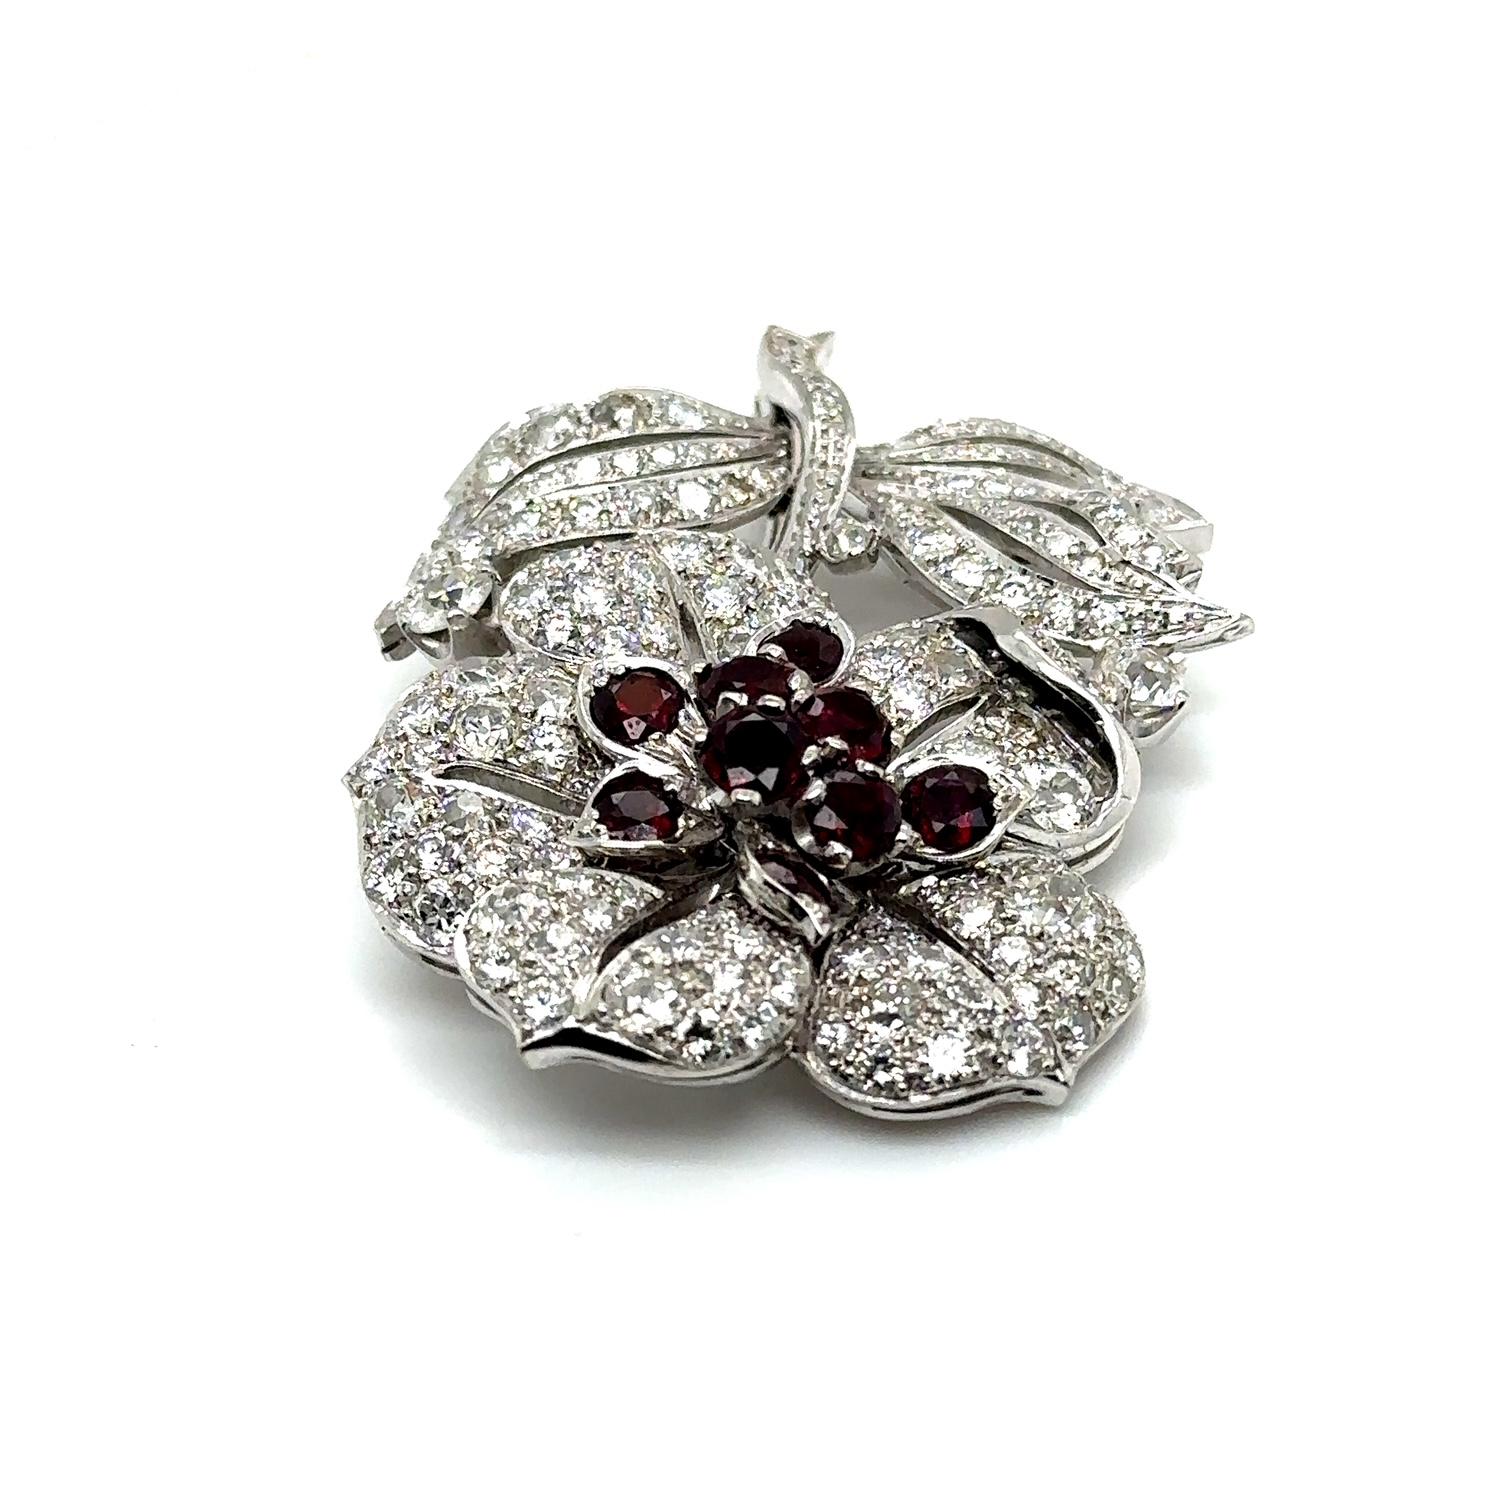 Introducing a timeless piece of elegance: the 18ct White Gold Large Ruby And Diamond Flower Brooch. Crafted circa 1960, this exquisite accessory exudes vintage charm and sophistication.
At its heart lies a radiant bouquet of nine stunning rubies,